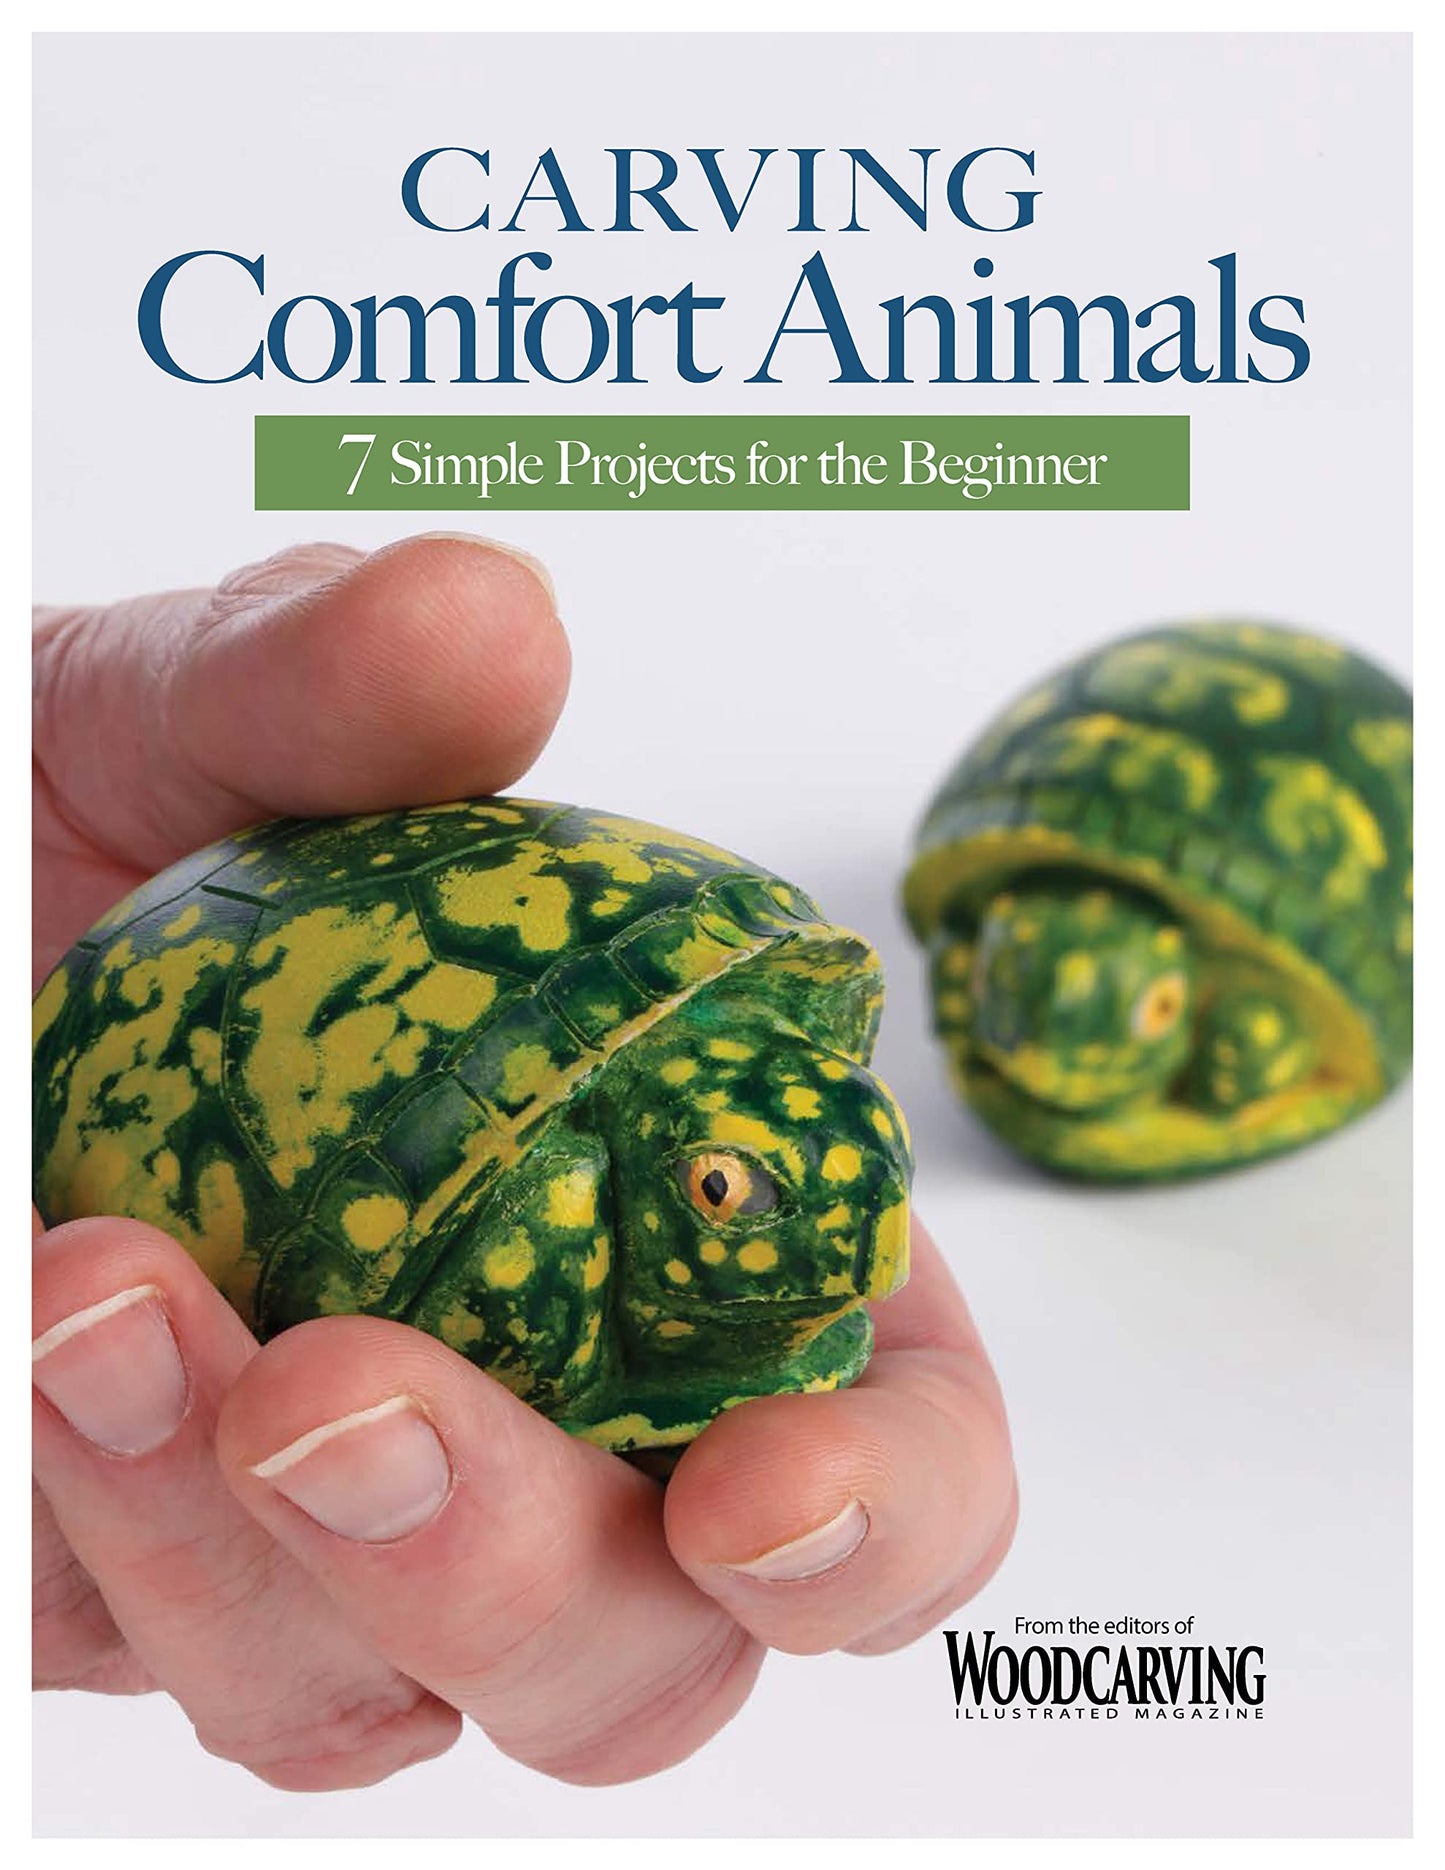 Carving Comfort Animals: 7 Simple Projects for the Beginner (Fox Chapel Publishing) Easy Woodcarving Patterns for Penguins, Turtles, Owls, and More,